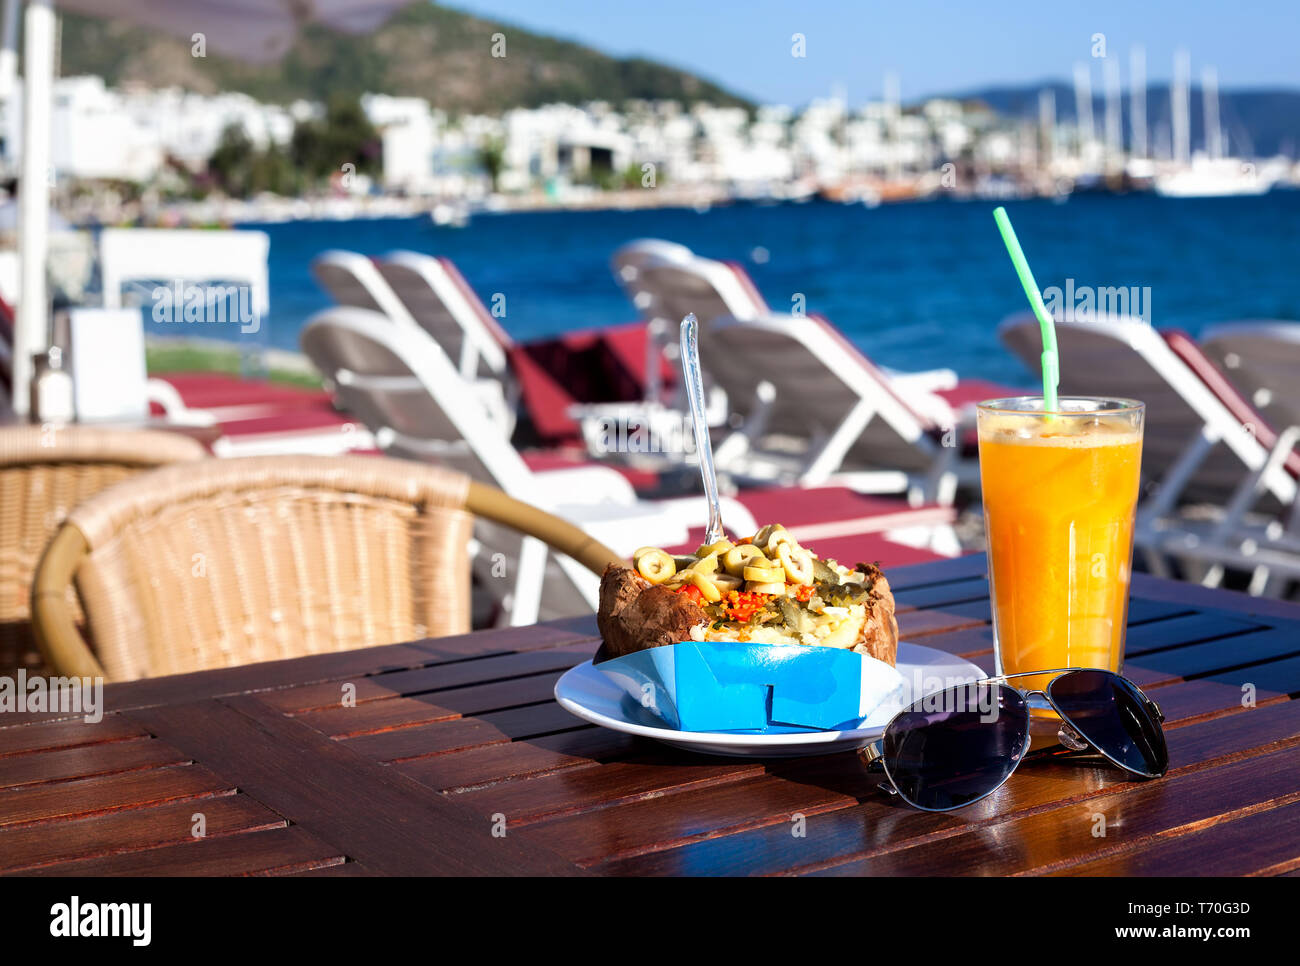 Stuffed potato with vegetables called Kumpir and Orange juice in sea view resort in South of Turke Stock Photo